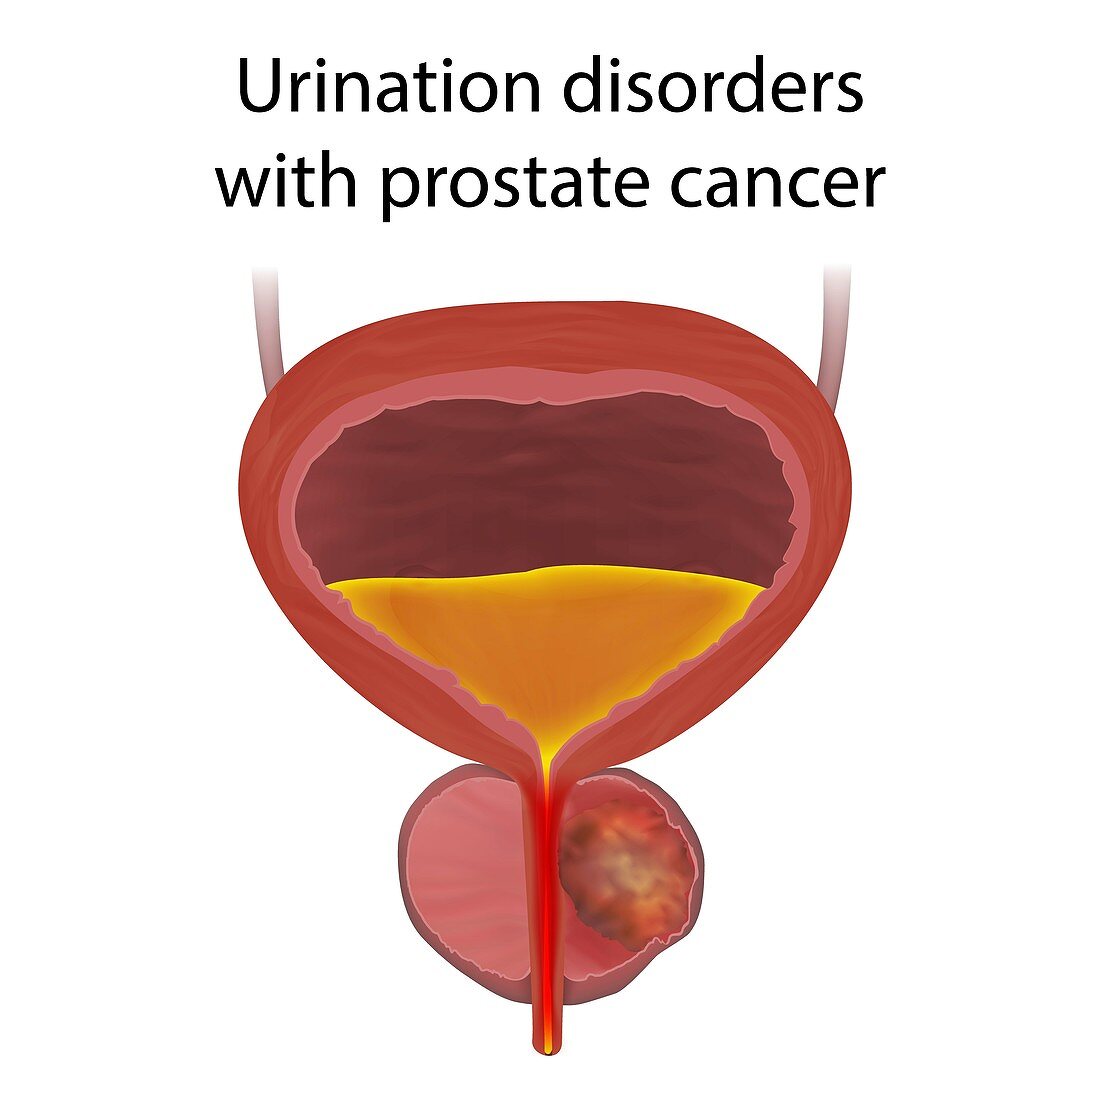 Urinary disorders with prostate cancer, illustration